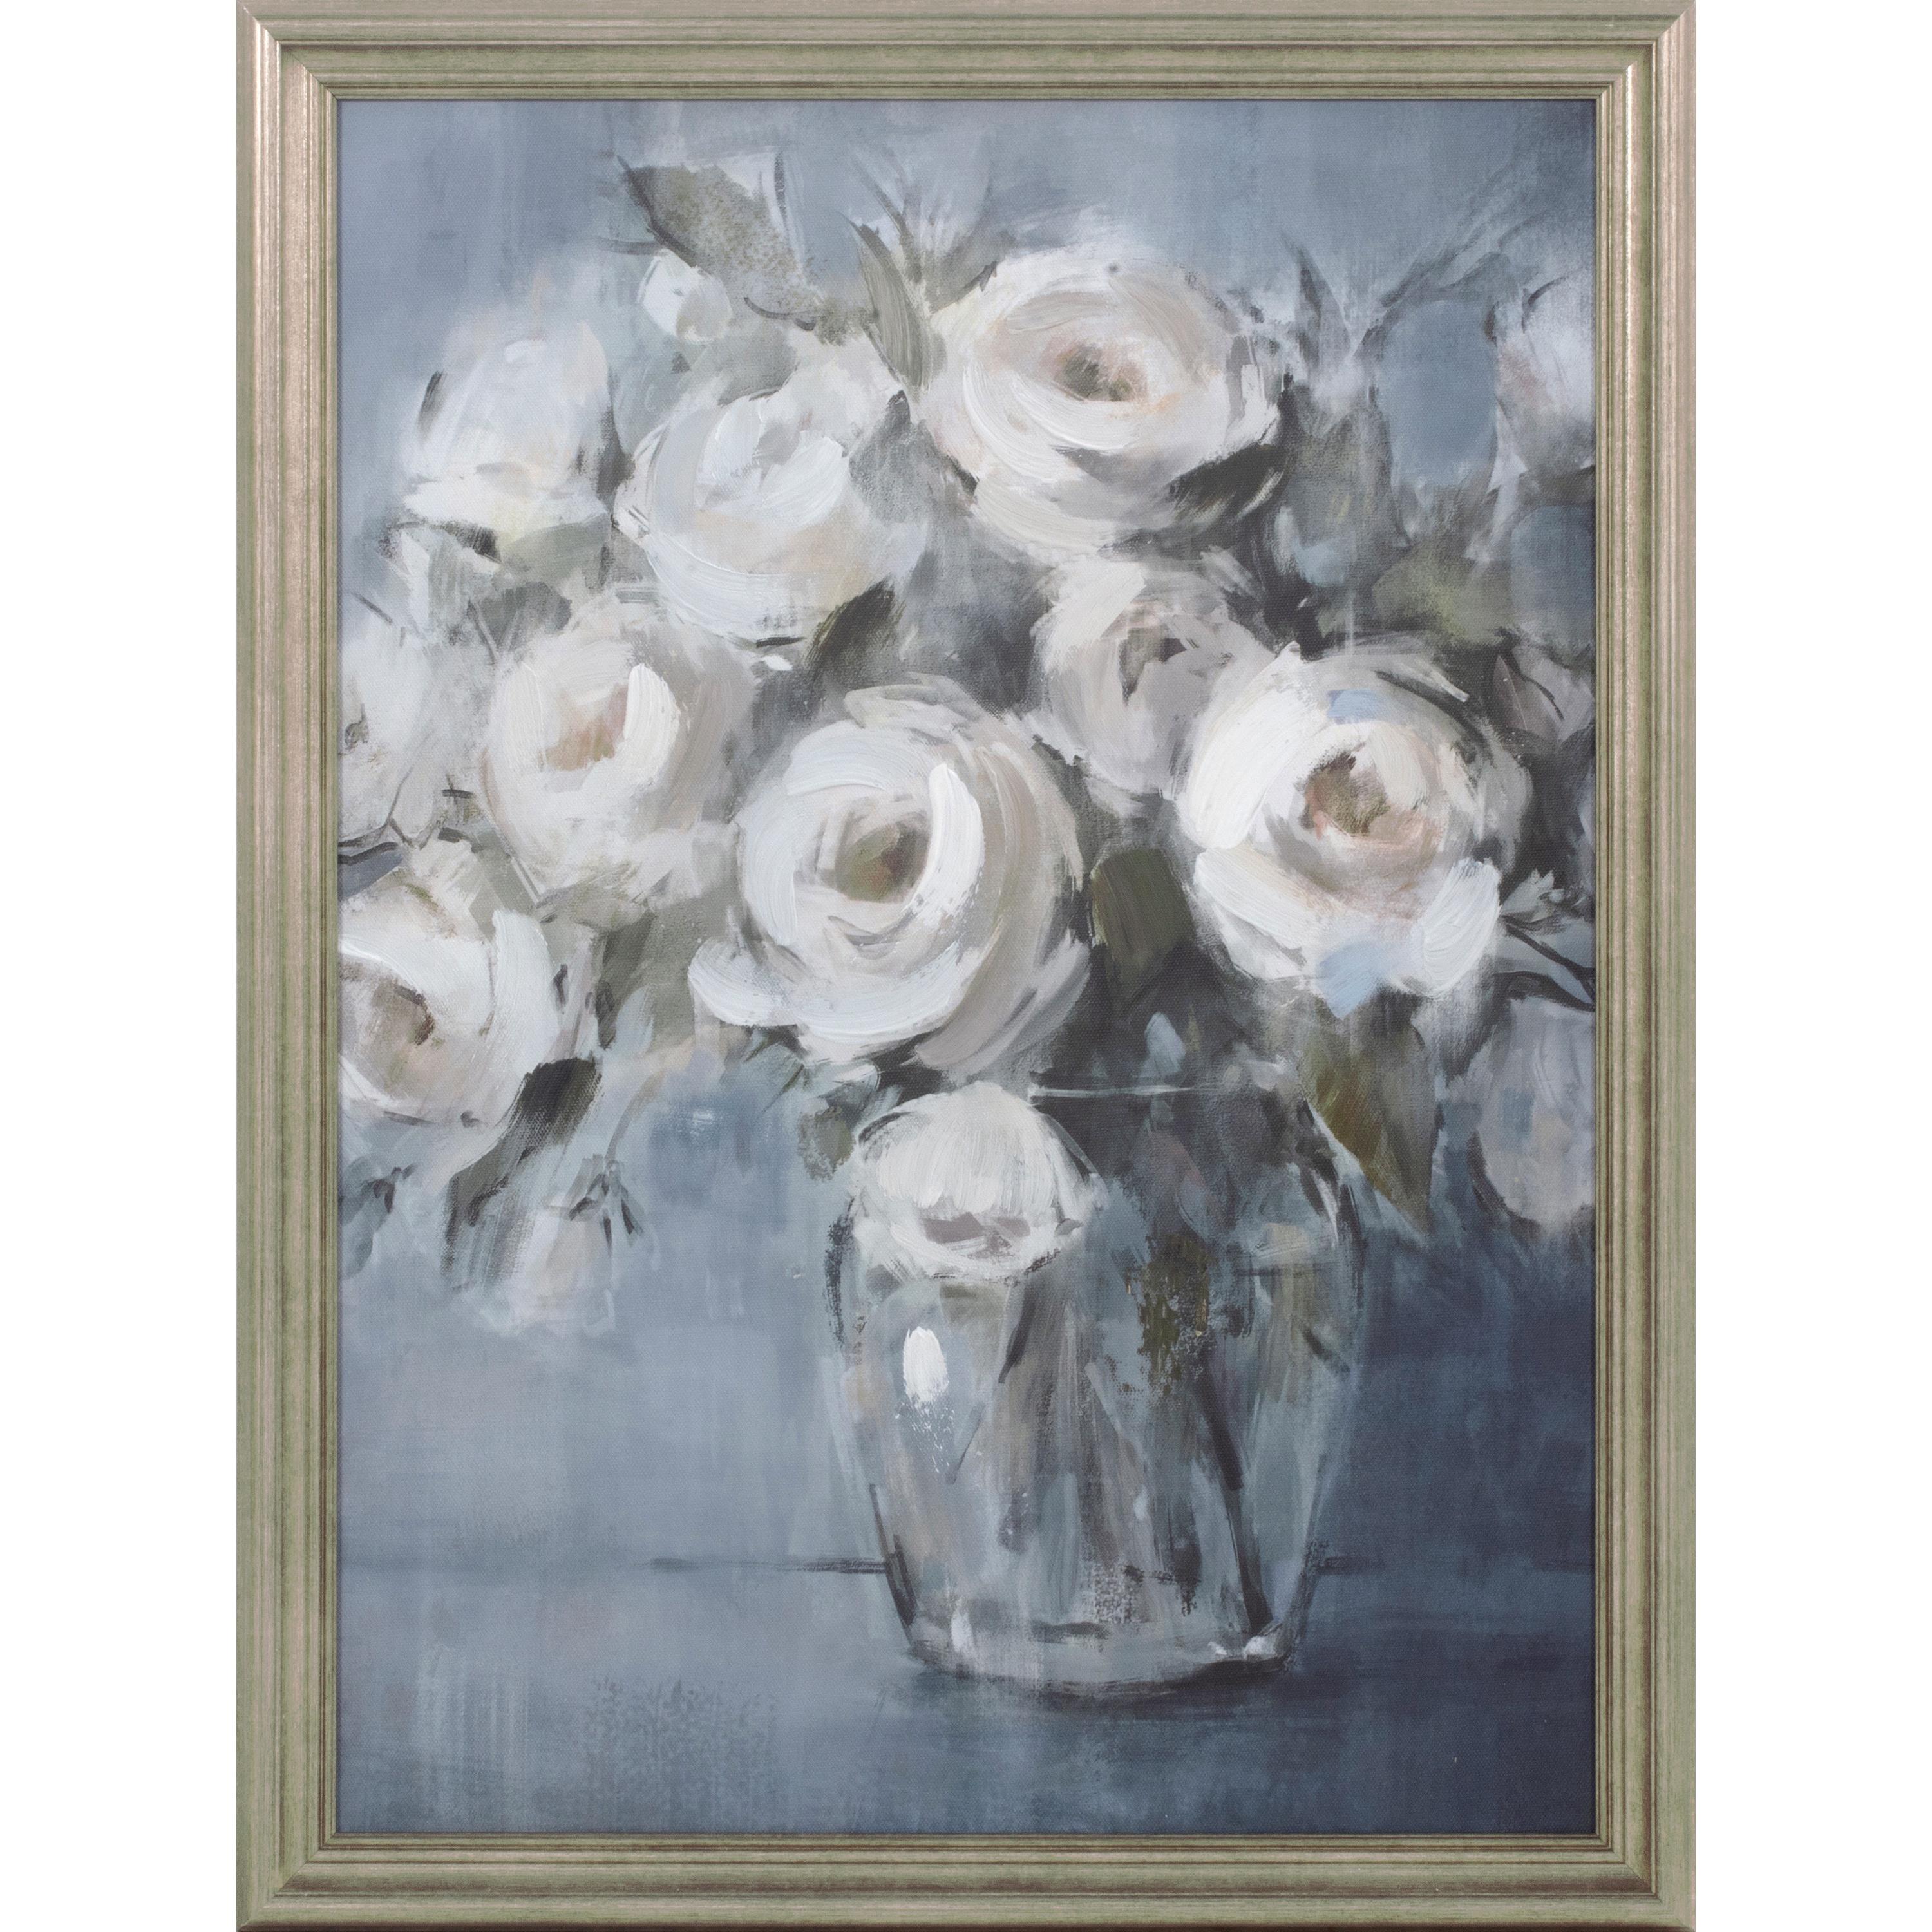 My Texas House White Rose Bouquet on Blue Framed Emb Canvas Board 18" x 24" - image 1 of 5